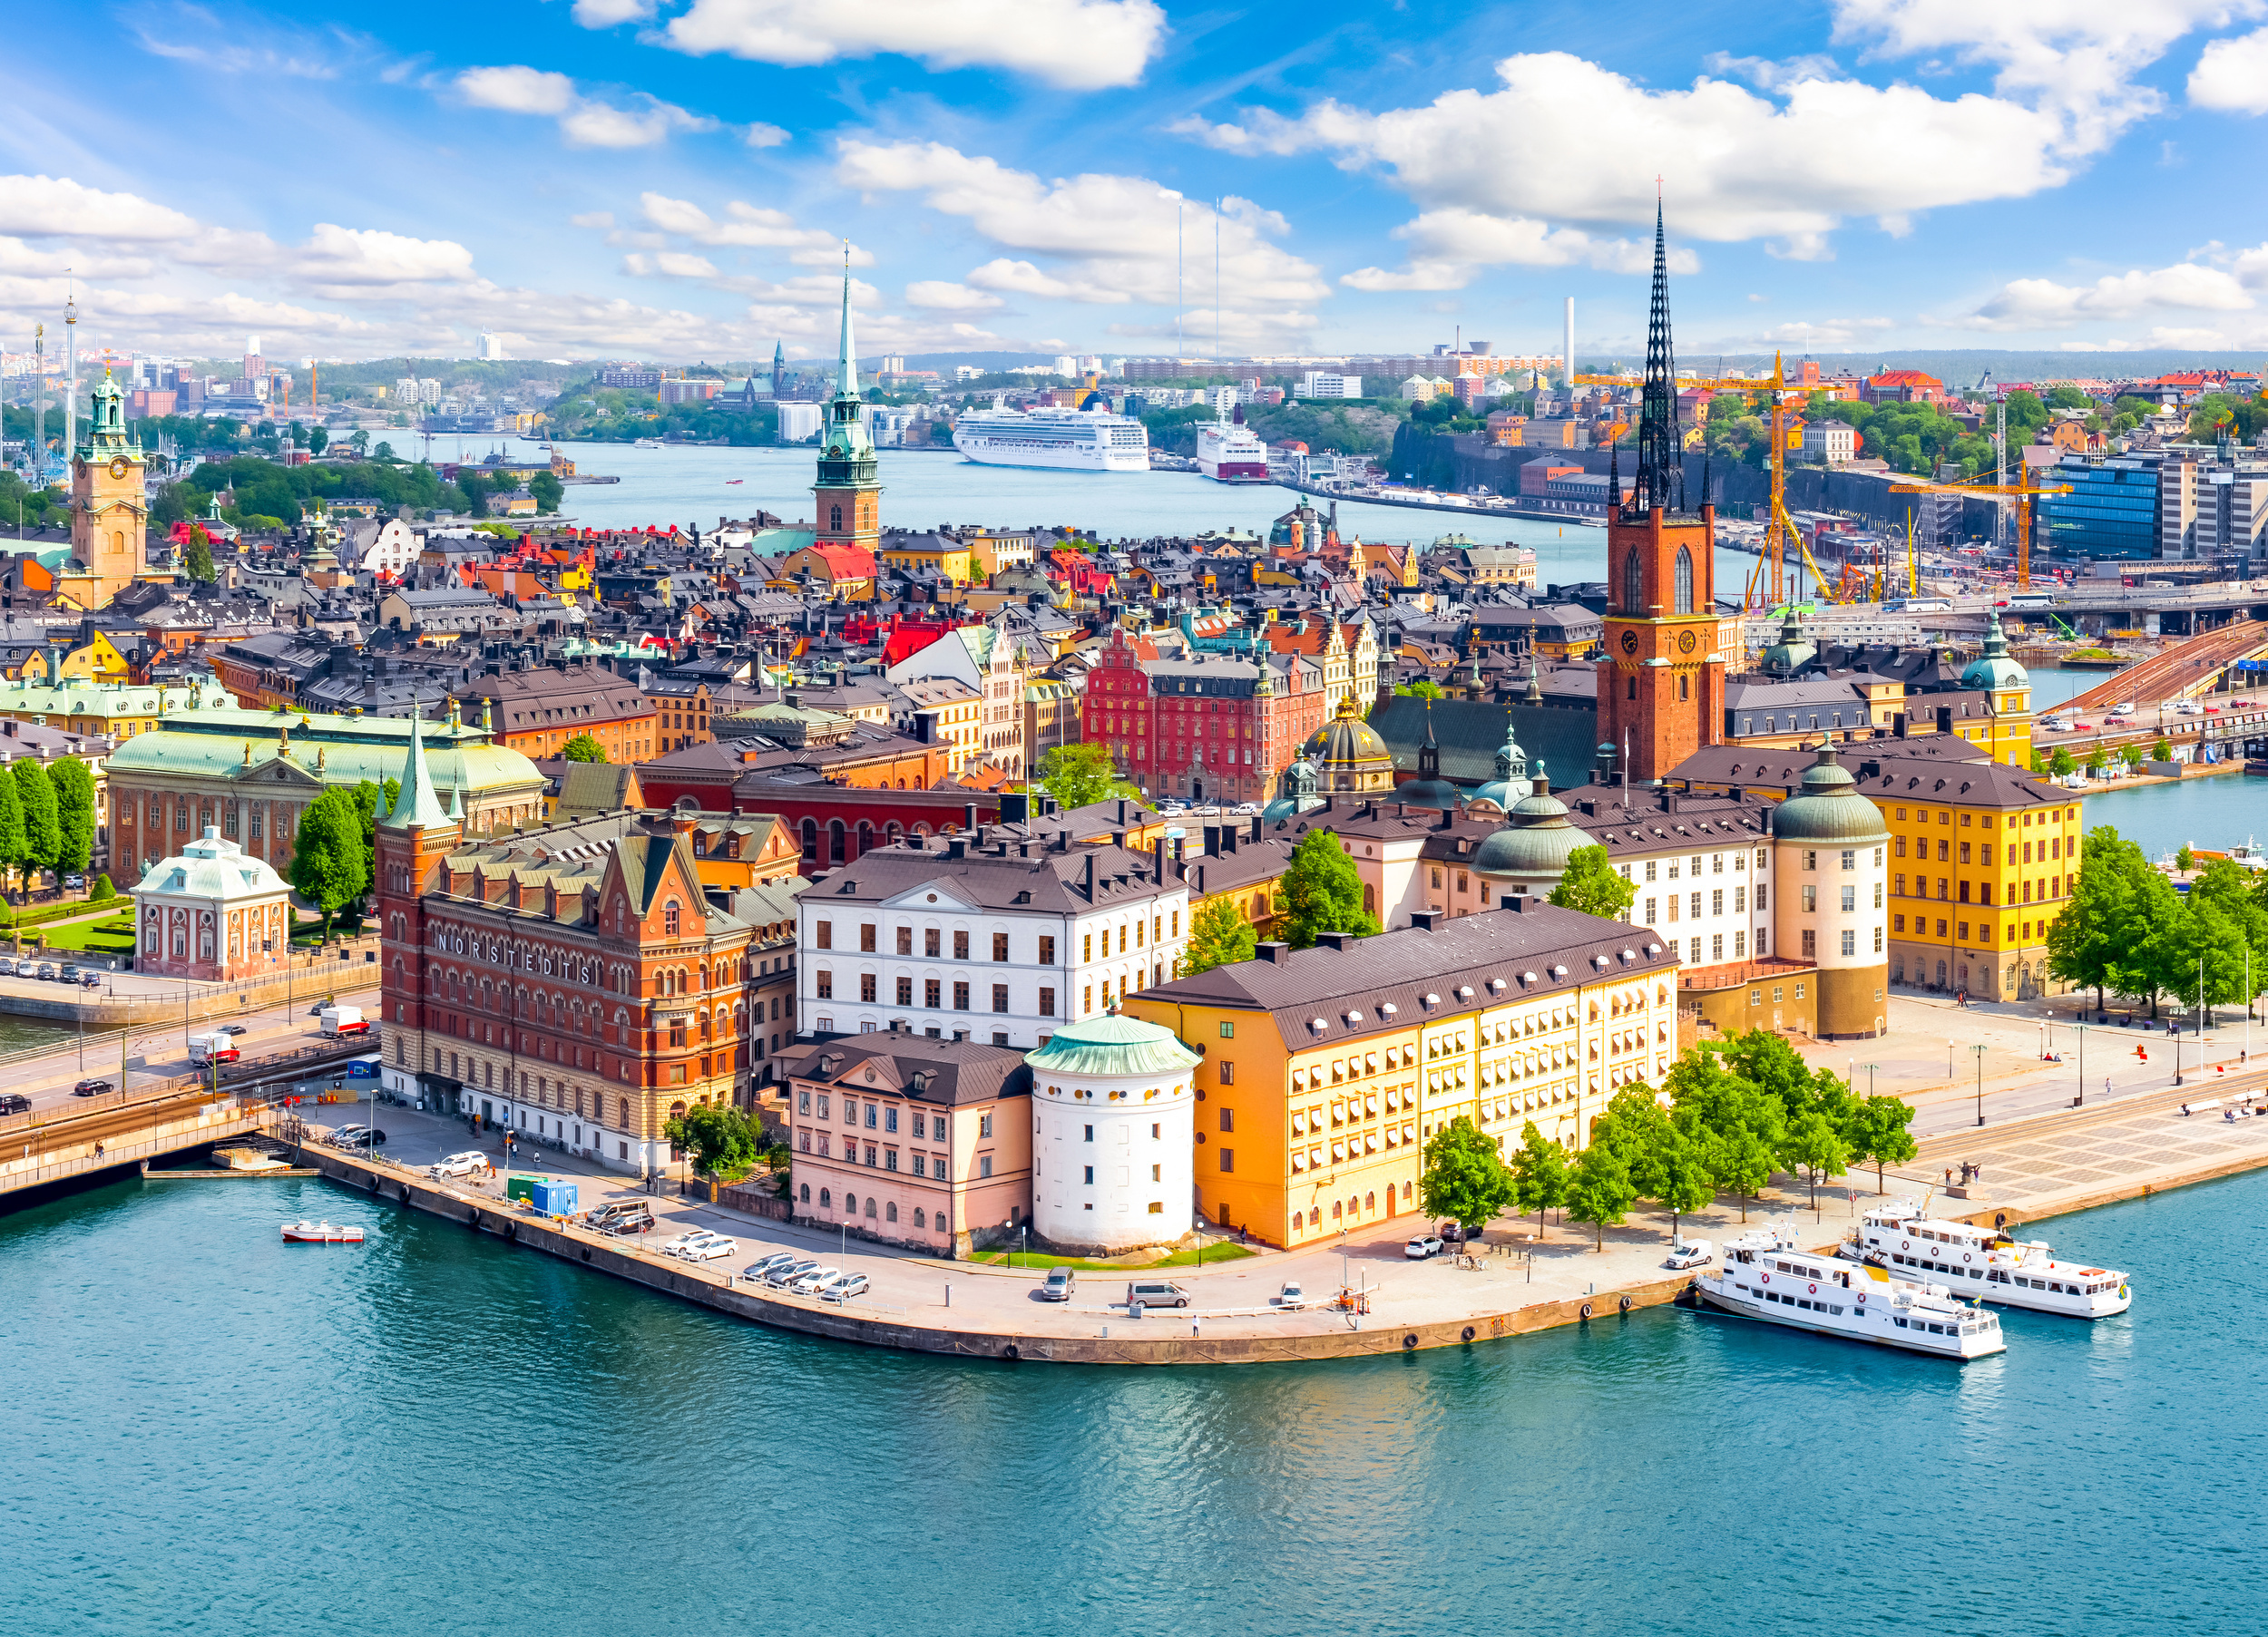 <p>Unless you really like frigid walks and bundling up, it’s most advisable to visit Stockholm in the summer months. Then, you can make the most out of rambling around the Scandinavian city in the sun and enjoying fika (Swedish coffee break) afterward.</p><p>You may also like: <a href='https://www.yardbarker.com/lifestyle/articles/12_high_fat_foods_you_should_avoid_and_12_you_should_eat_regularly_111523/s1__39147466'>12 high-fat foods you should avoid and 12 you should eat regularly</a></p>